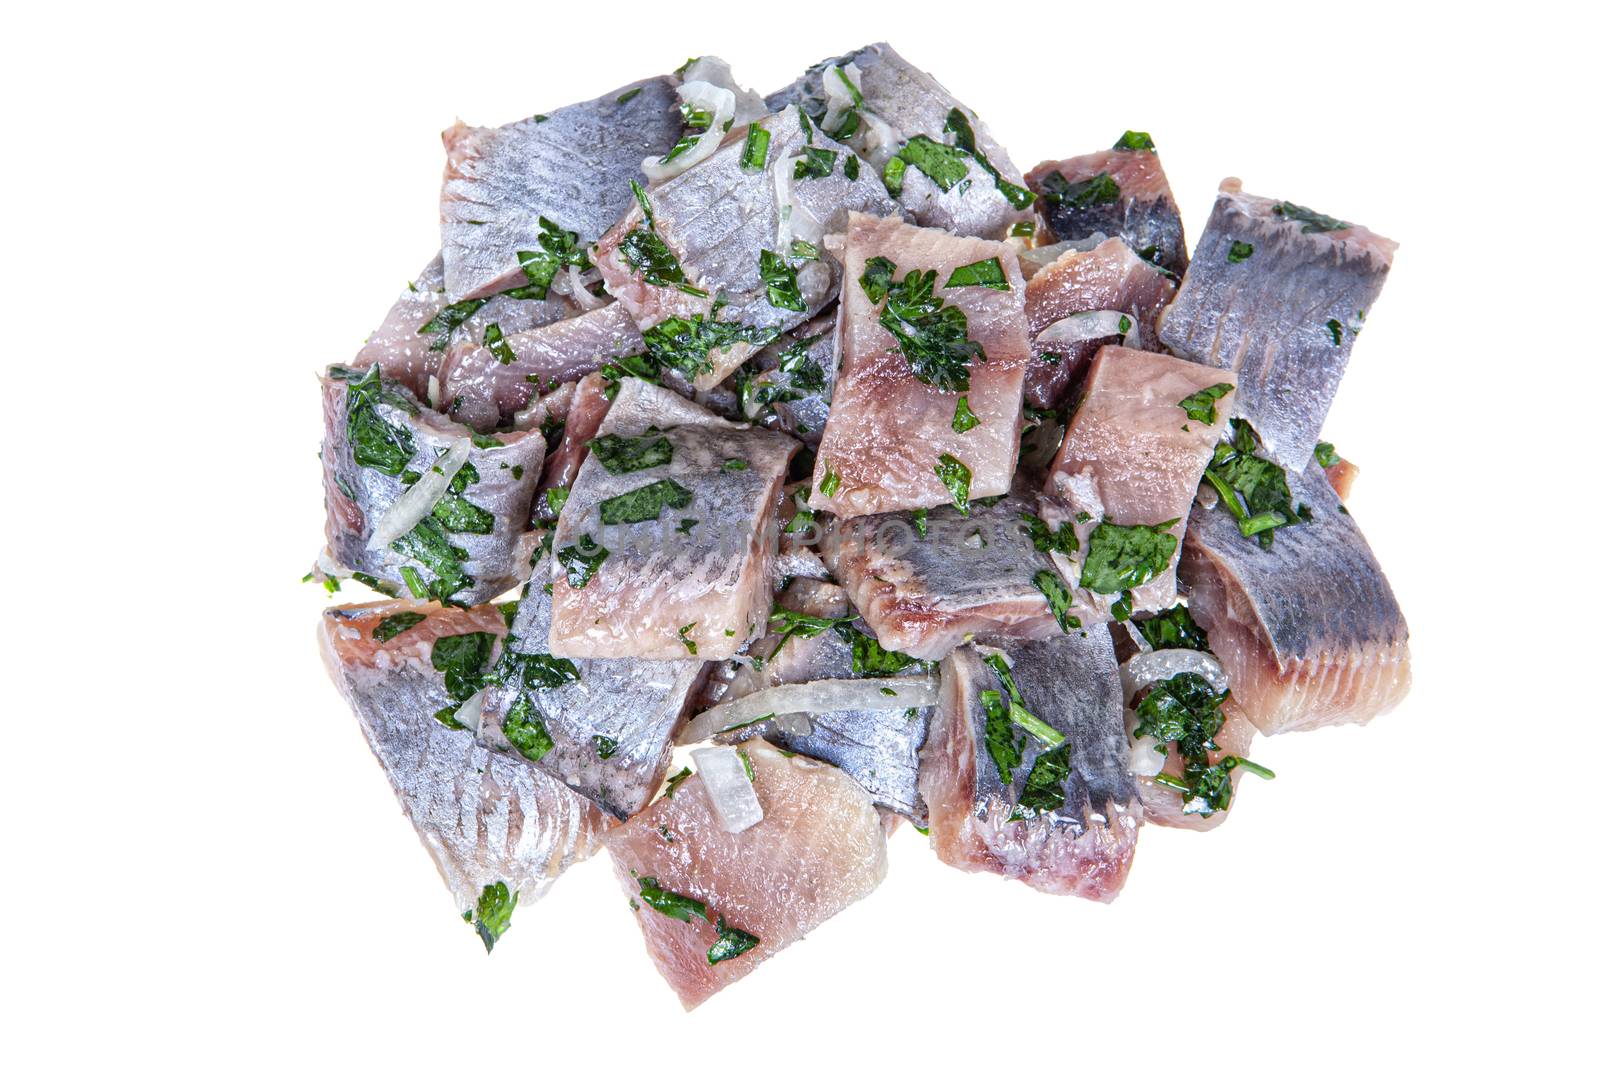 Pieces of herring on an isolated studio background